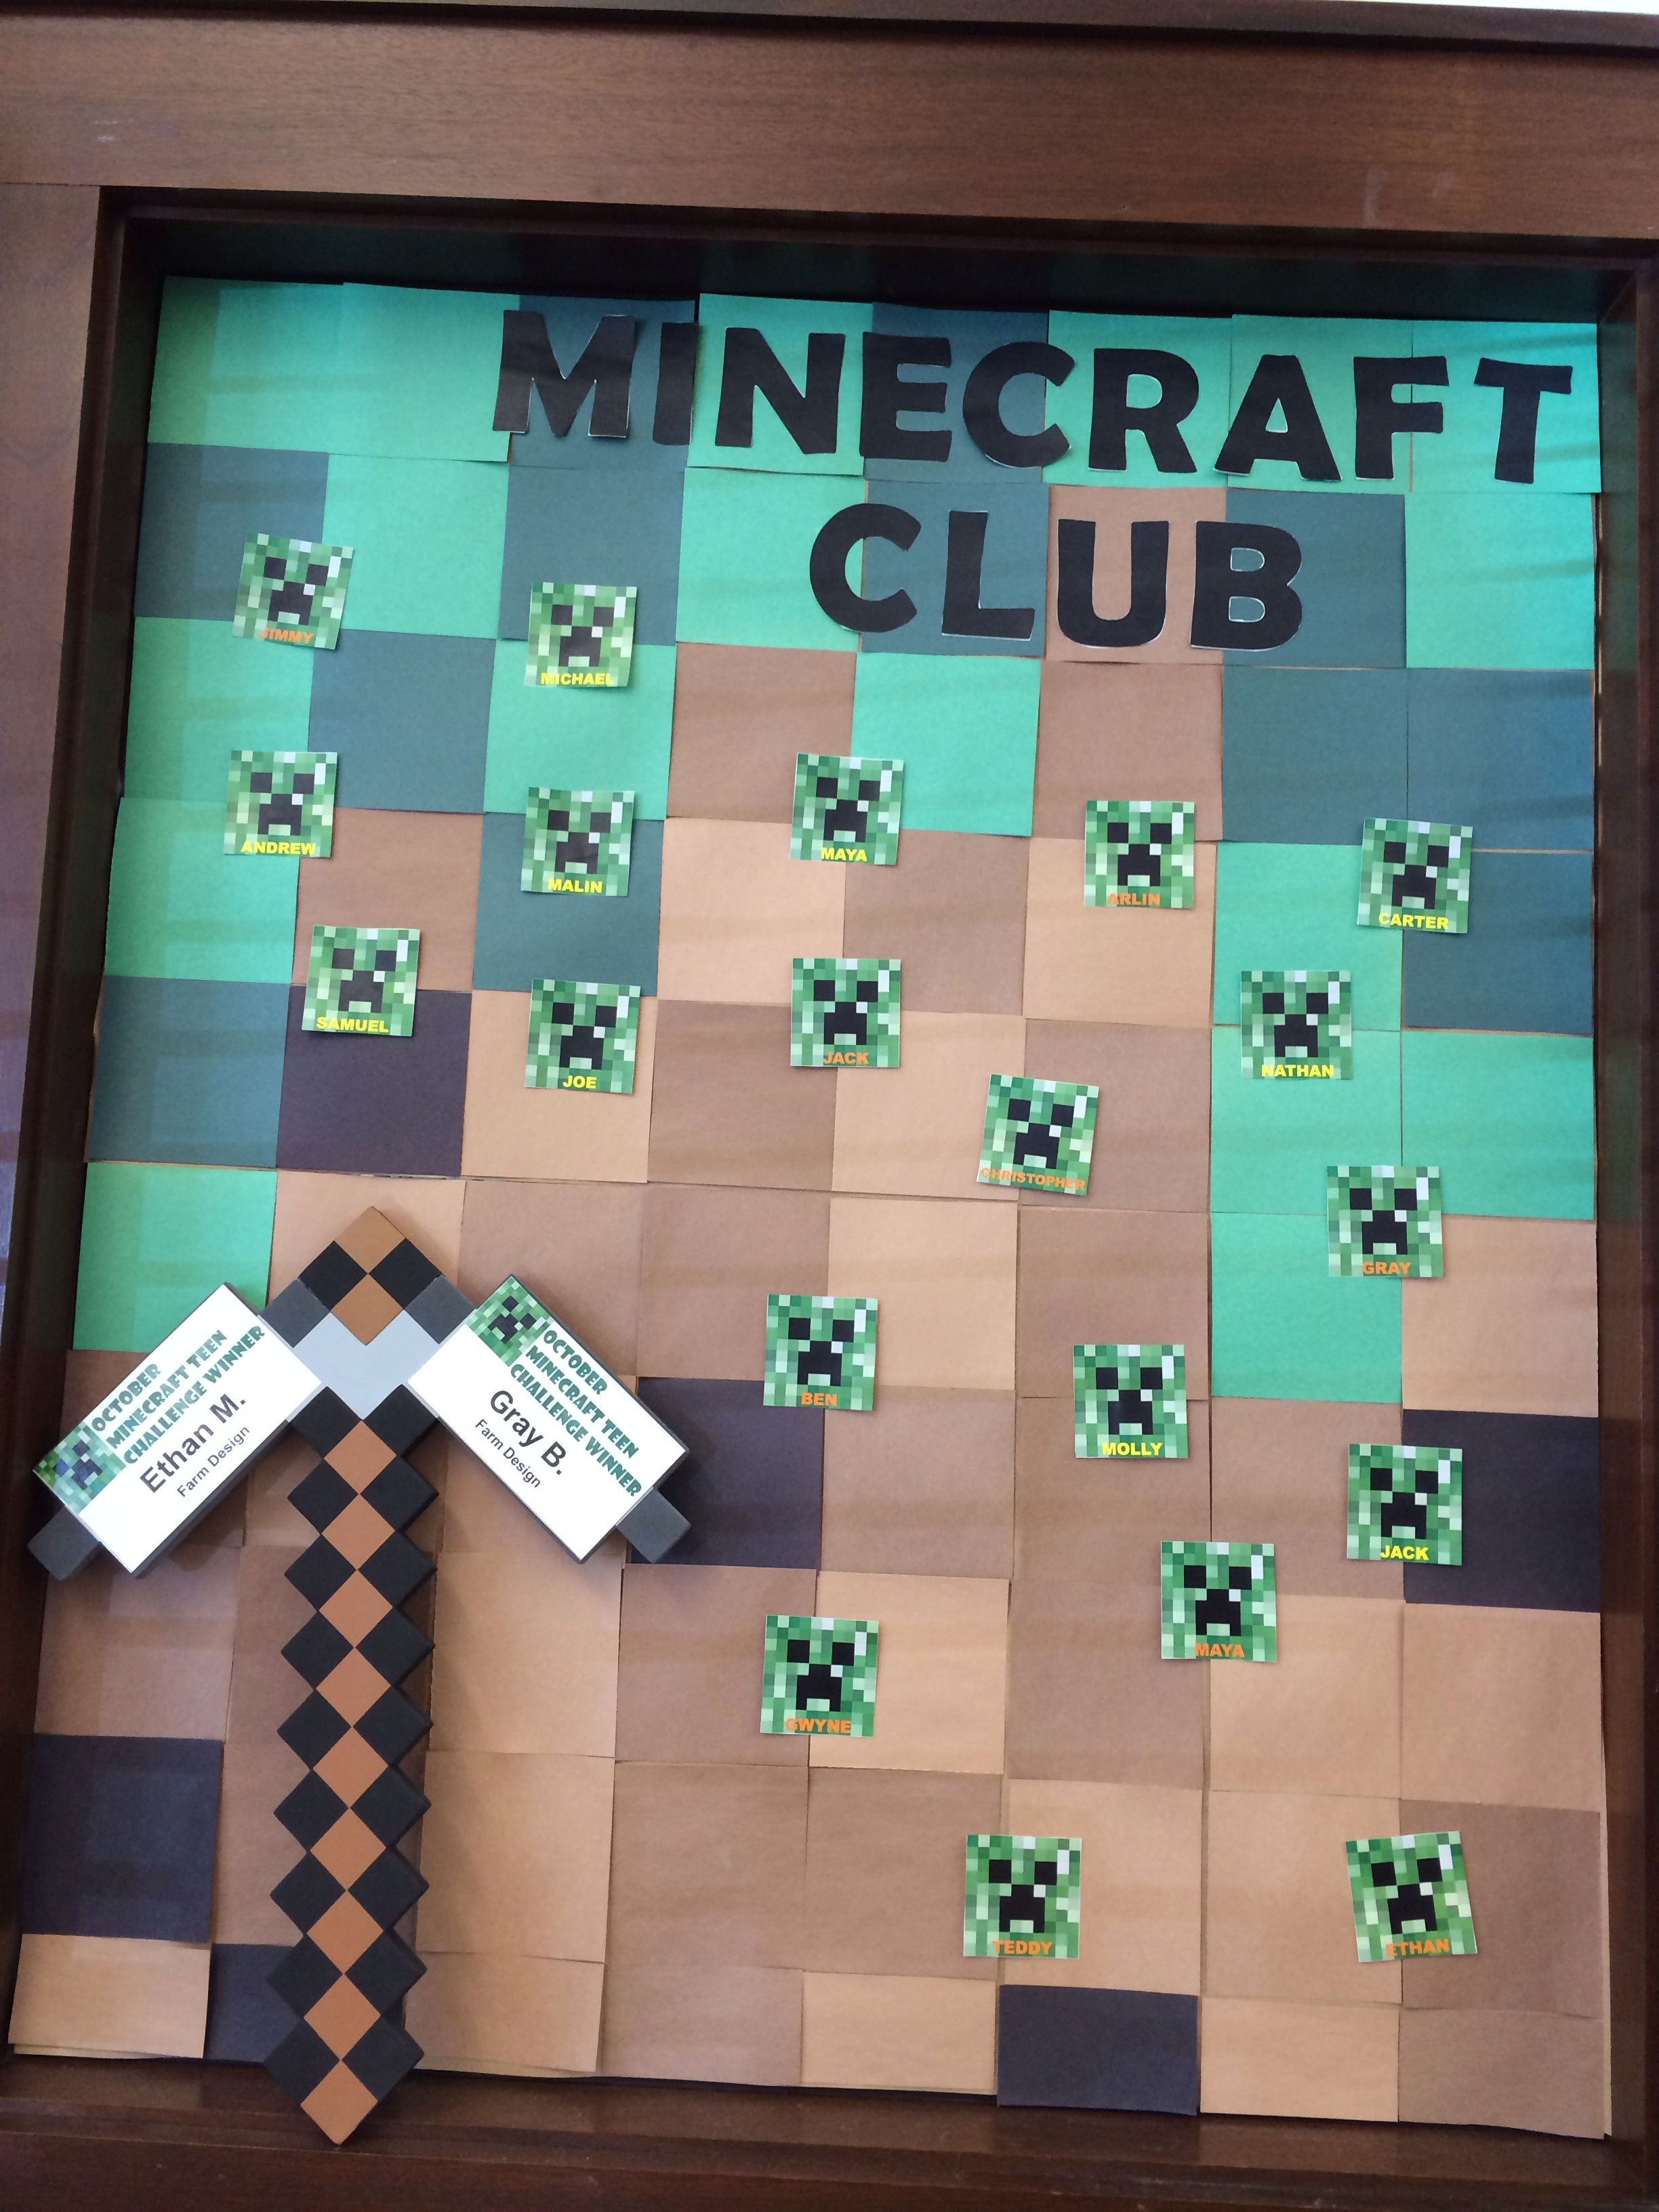 Minecraft Papercraft Chess Library Display for Minecraft Club